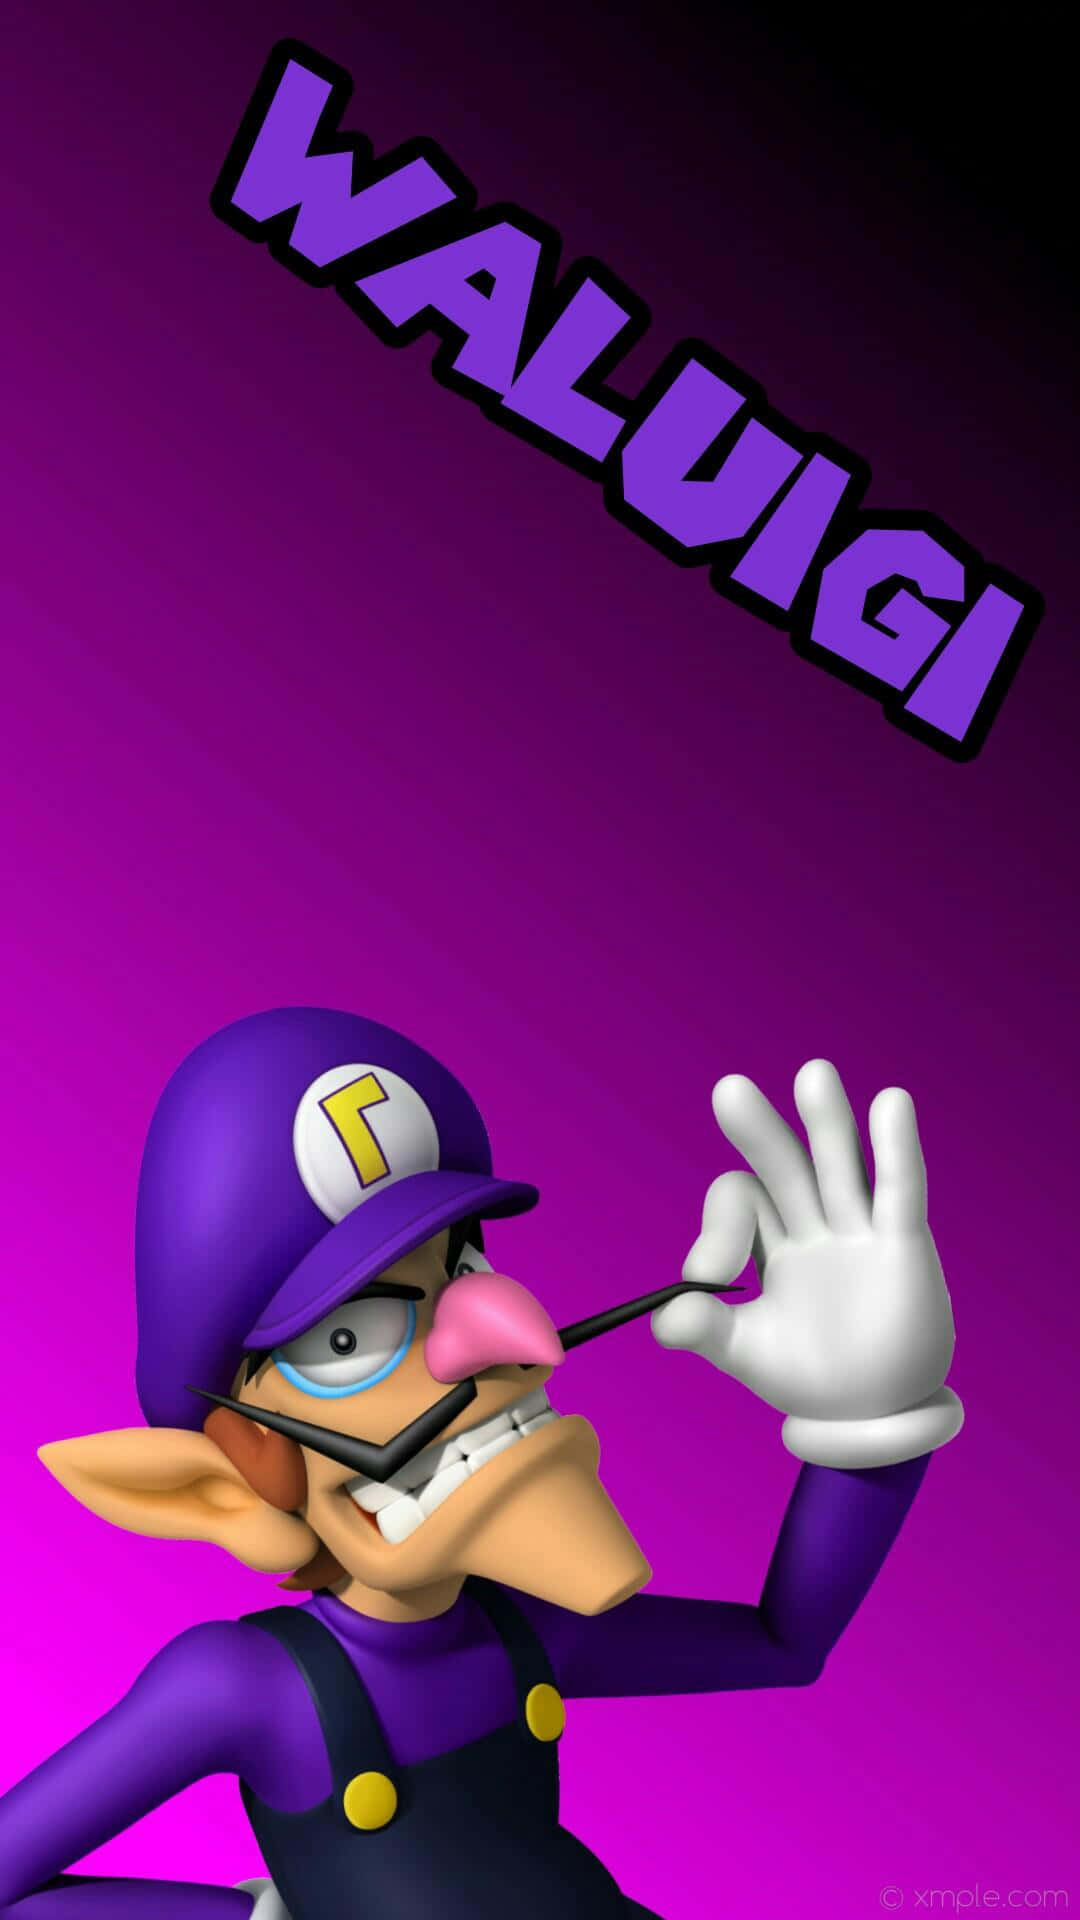 Waluigi Strikes A Pose In Action-packed Wallpaper